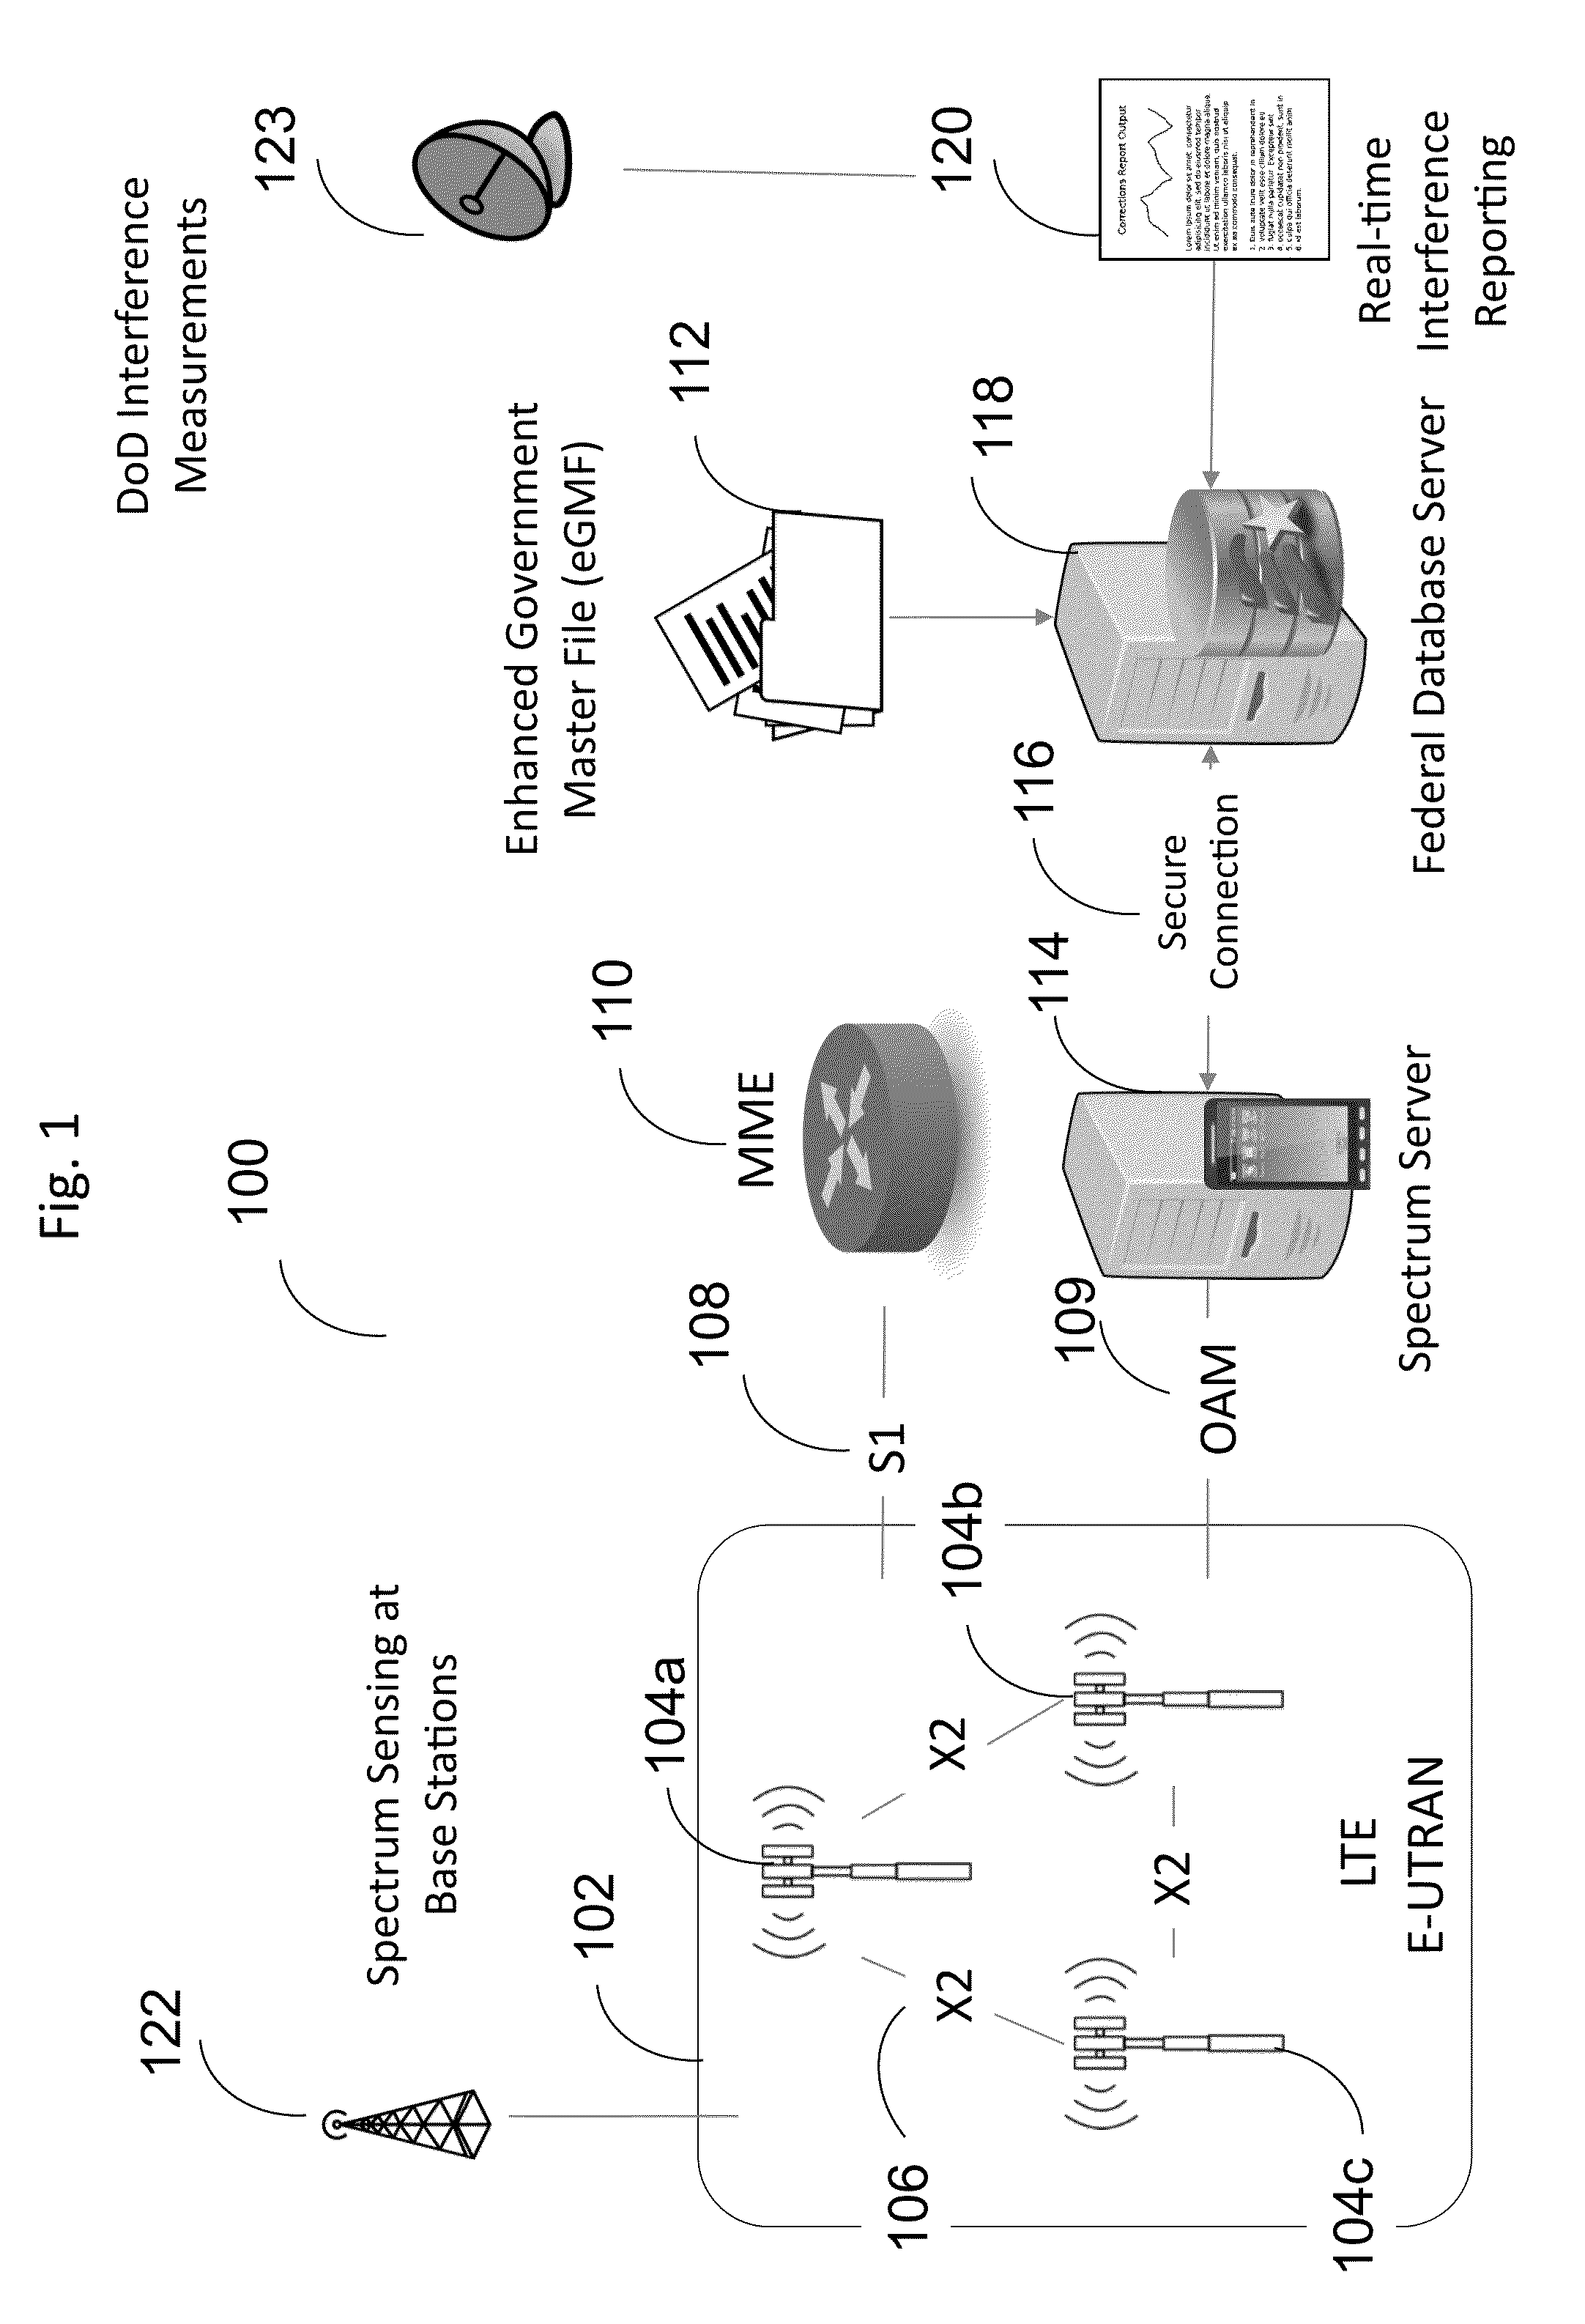 System and method for heterogenous spectrum sharing between commercial cellular operators and legacy incumbent users in wireless networks